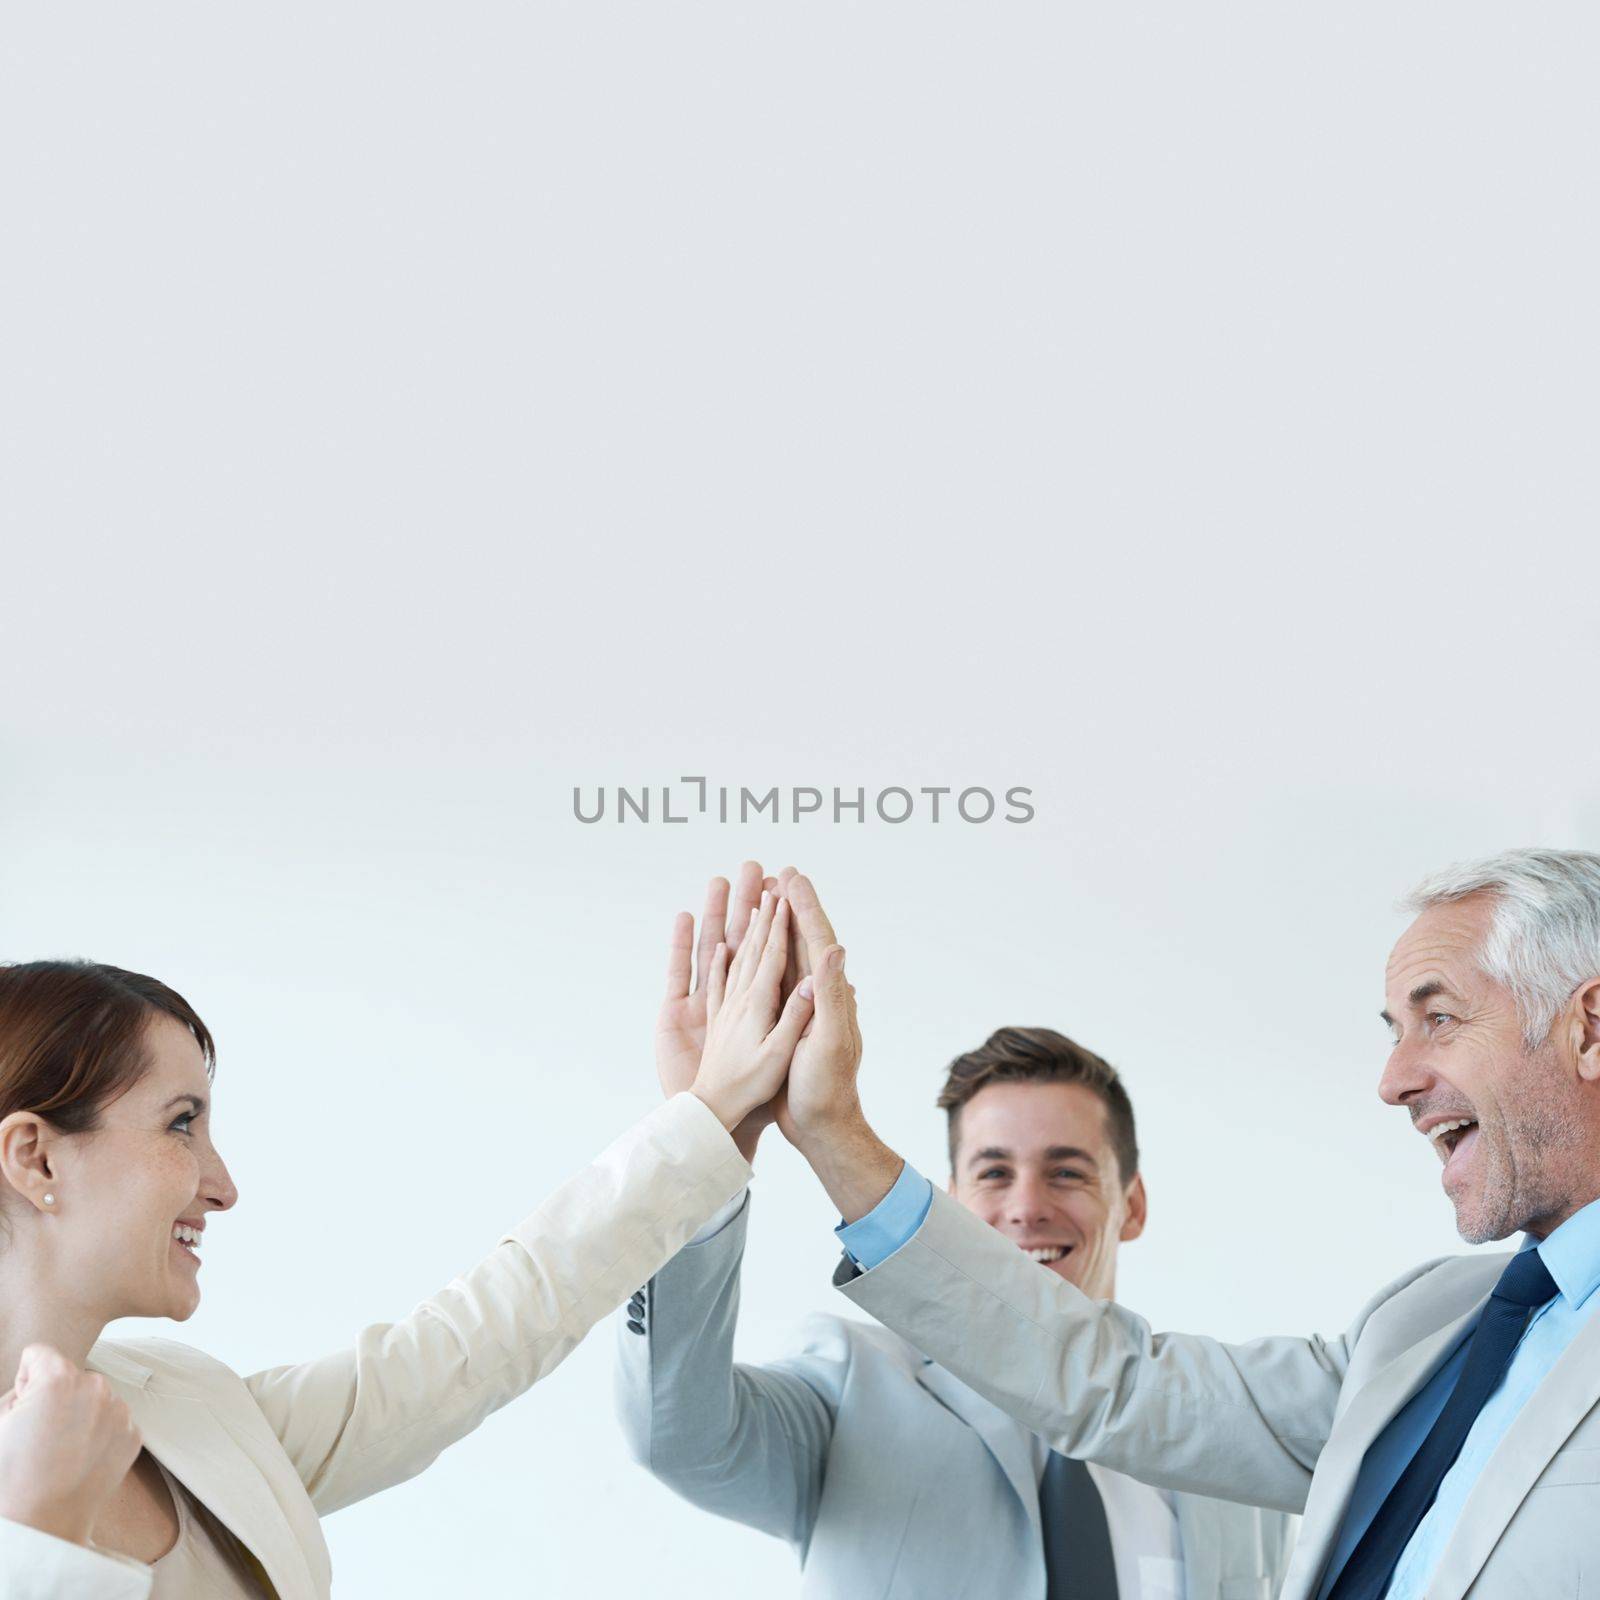 They reached their goals. Business people celebrating another successful deal with a high-five. by YuriArcurs